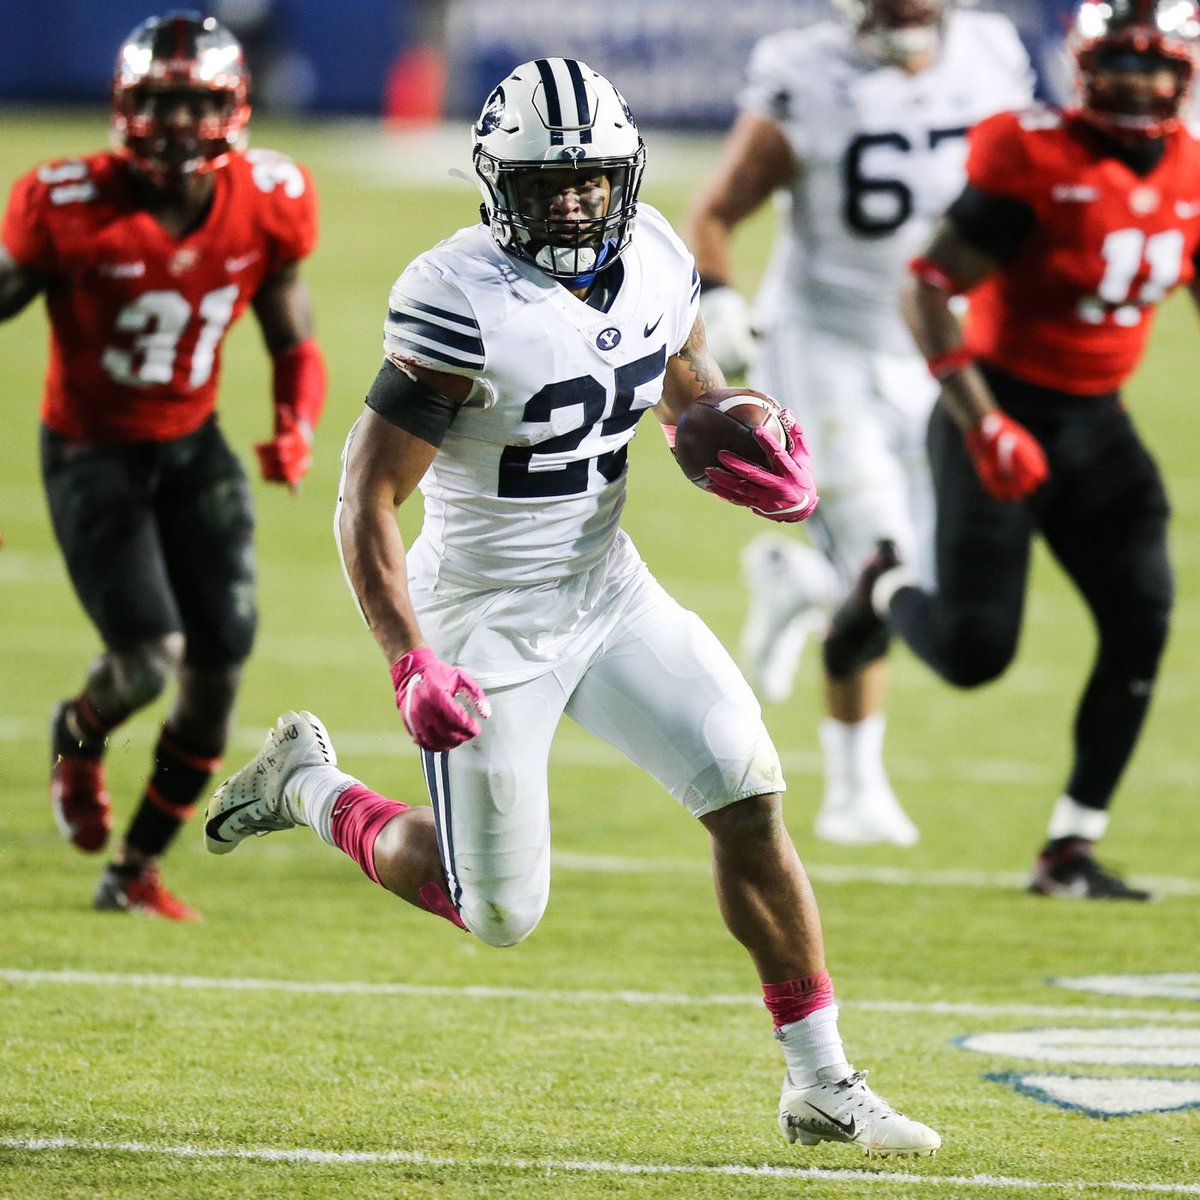 Tyler Allgeier (BYU) is such a fascinating RB prospect in 2022 NFL Draft Class

5’11” 220

Rushed for 2400+ yds & 29 TD as a HS Sr

Converted to LB @ BYU & recorded 26 tackles, 0.5 sacks, 1.0 FF

Switched back to RB in 2020, posted 150/1130/15 — big runs of 30+ yds in 7/11 games! https://t.co/WWMw8yUJf3